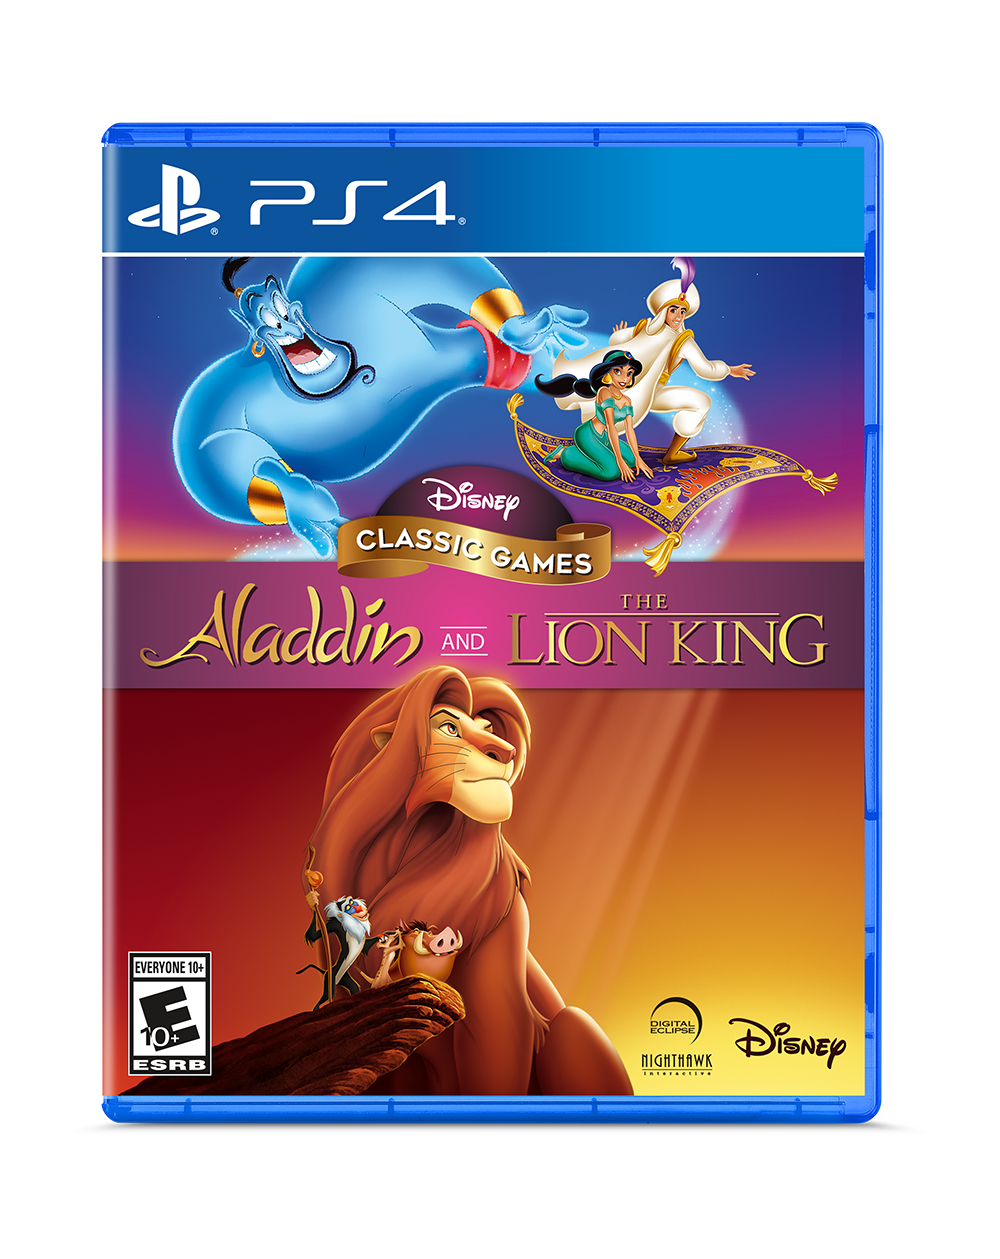 Disney Classic Games: Aladdin and The 